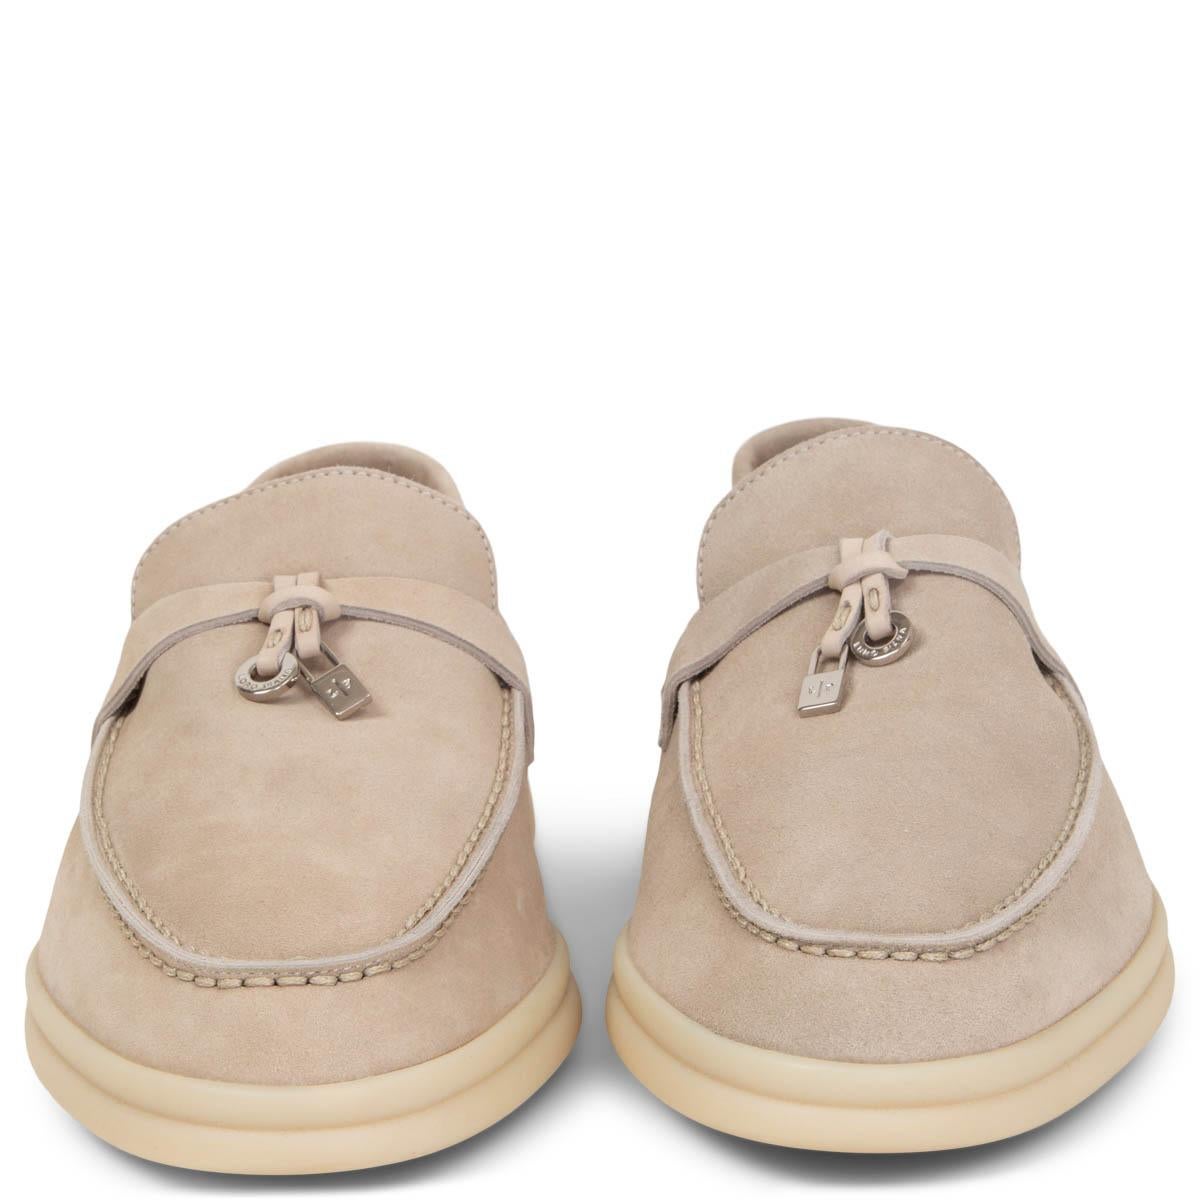 100% authentic Loro Piana Summer Walk Charms Loafers in light sand suede. Have been worn once and are in virtually new condition. Come with dust bag. 

Measurements
Imprinted Size	38
Shoe Size	38
Inside Sole	25cm (9.8in)
Width	7.5cm (2.9in)

All our